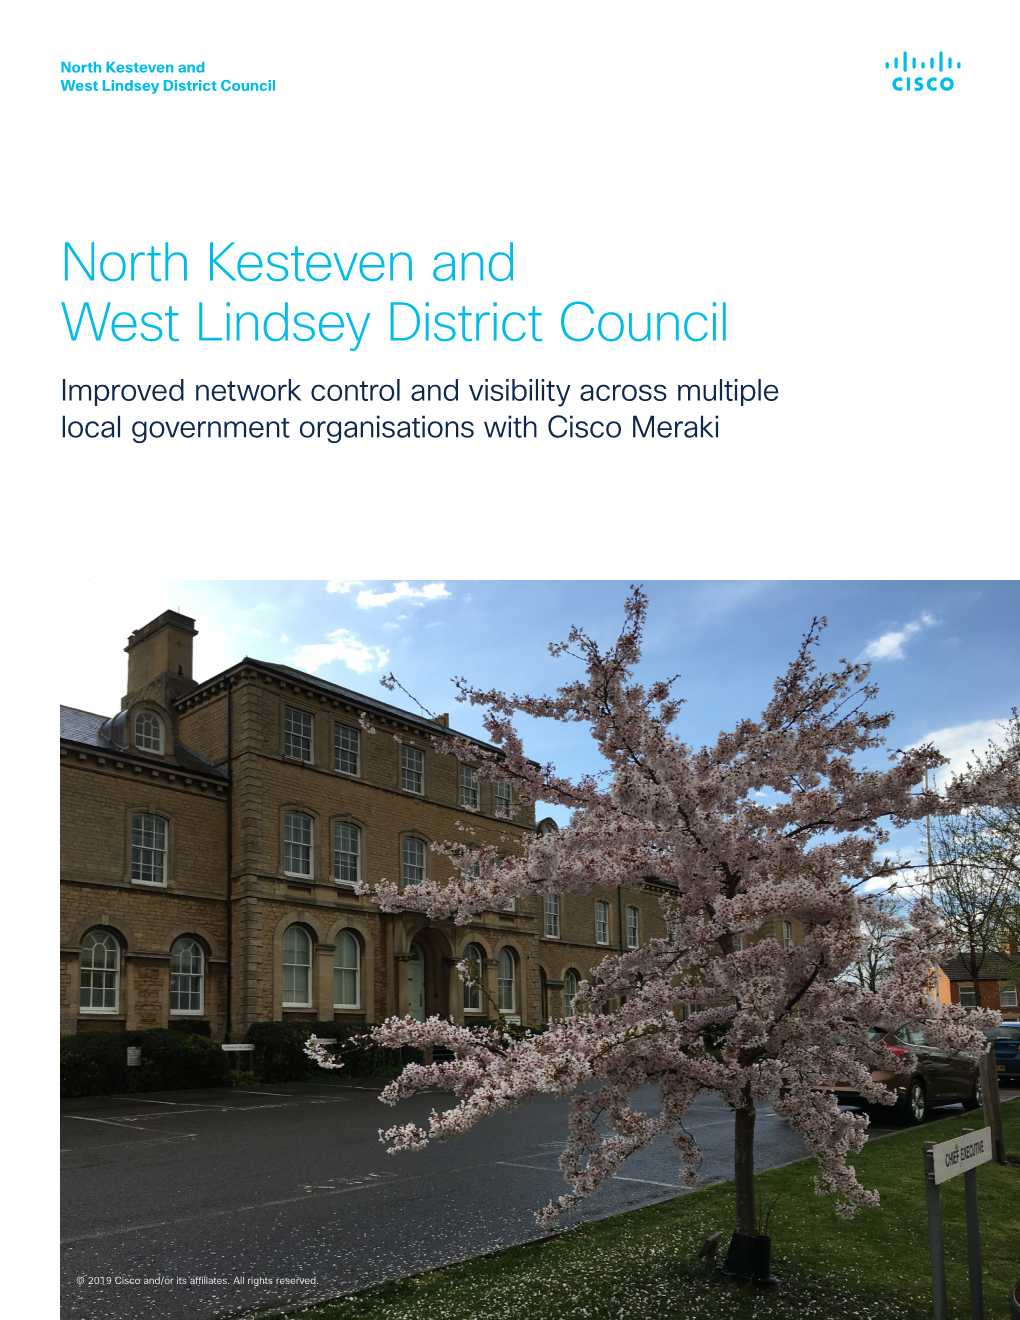 North Kesteven and West Lindsey District Council